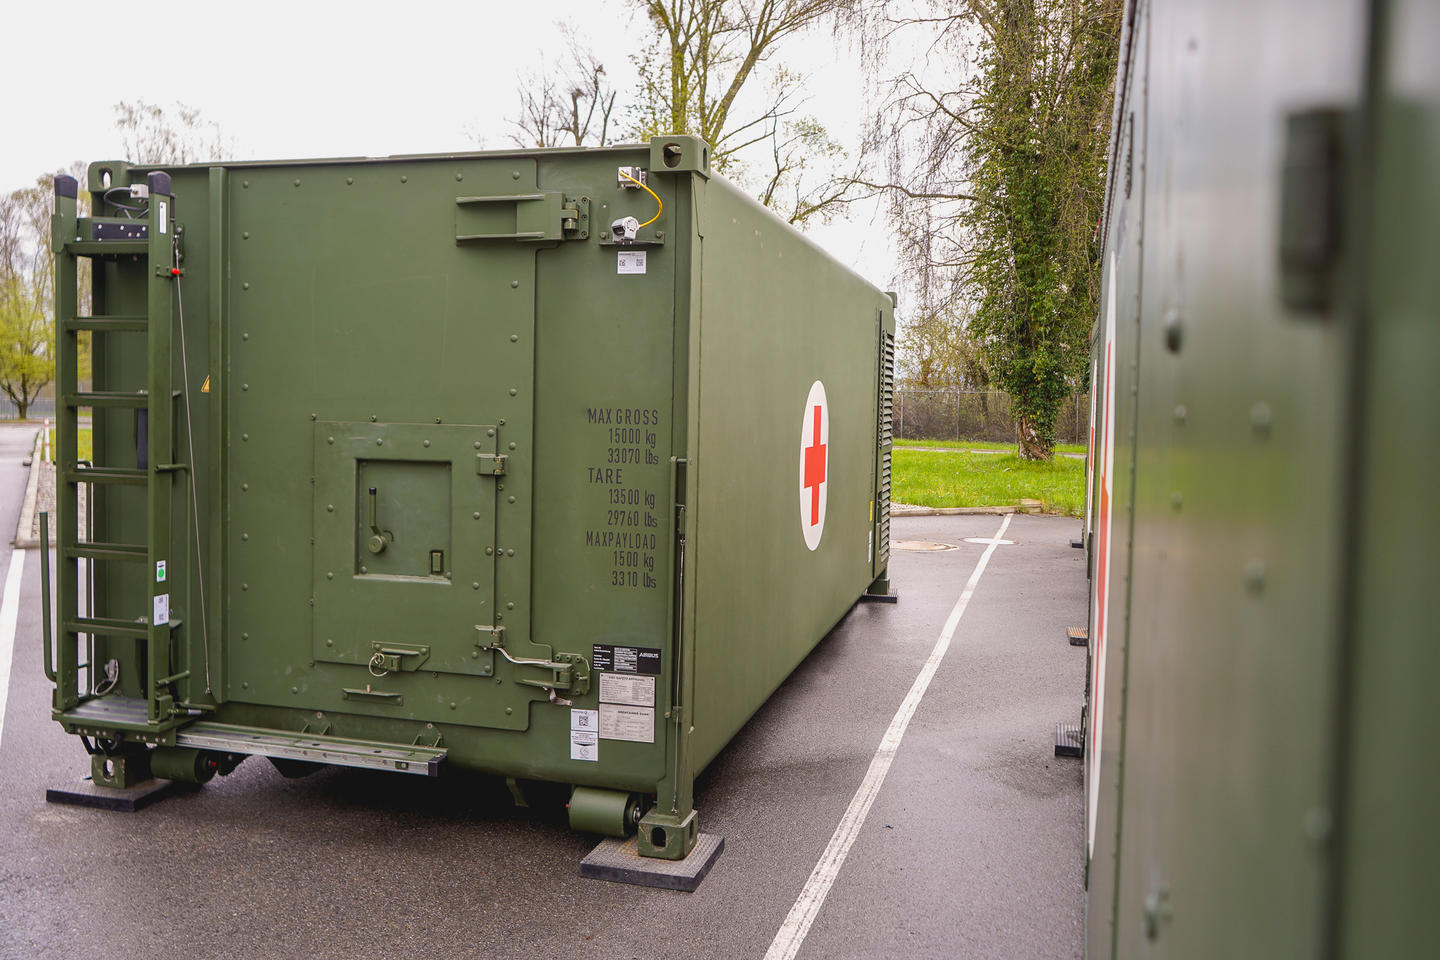 The protected-wounded transport container is based on the international ISO standard 20-foot container.